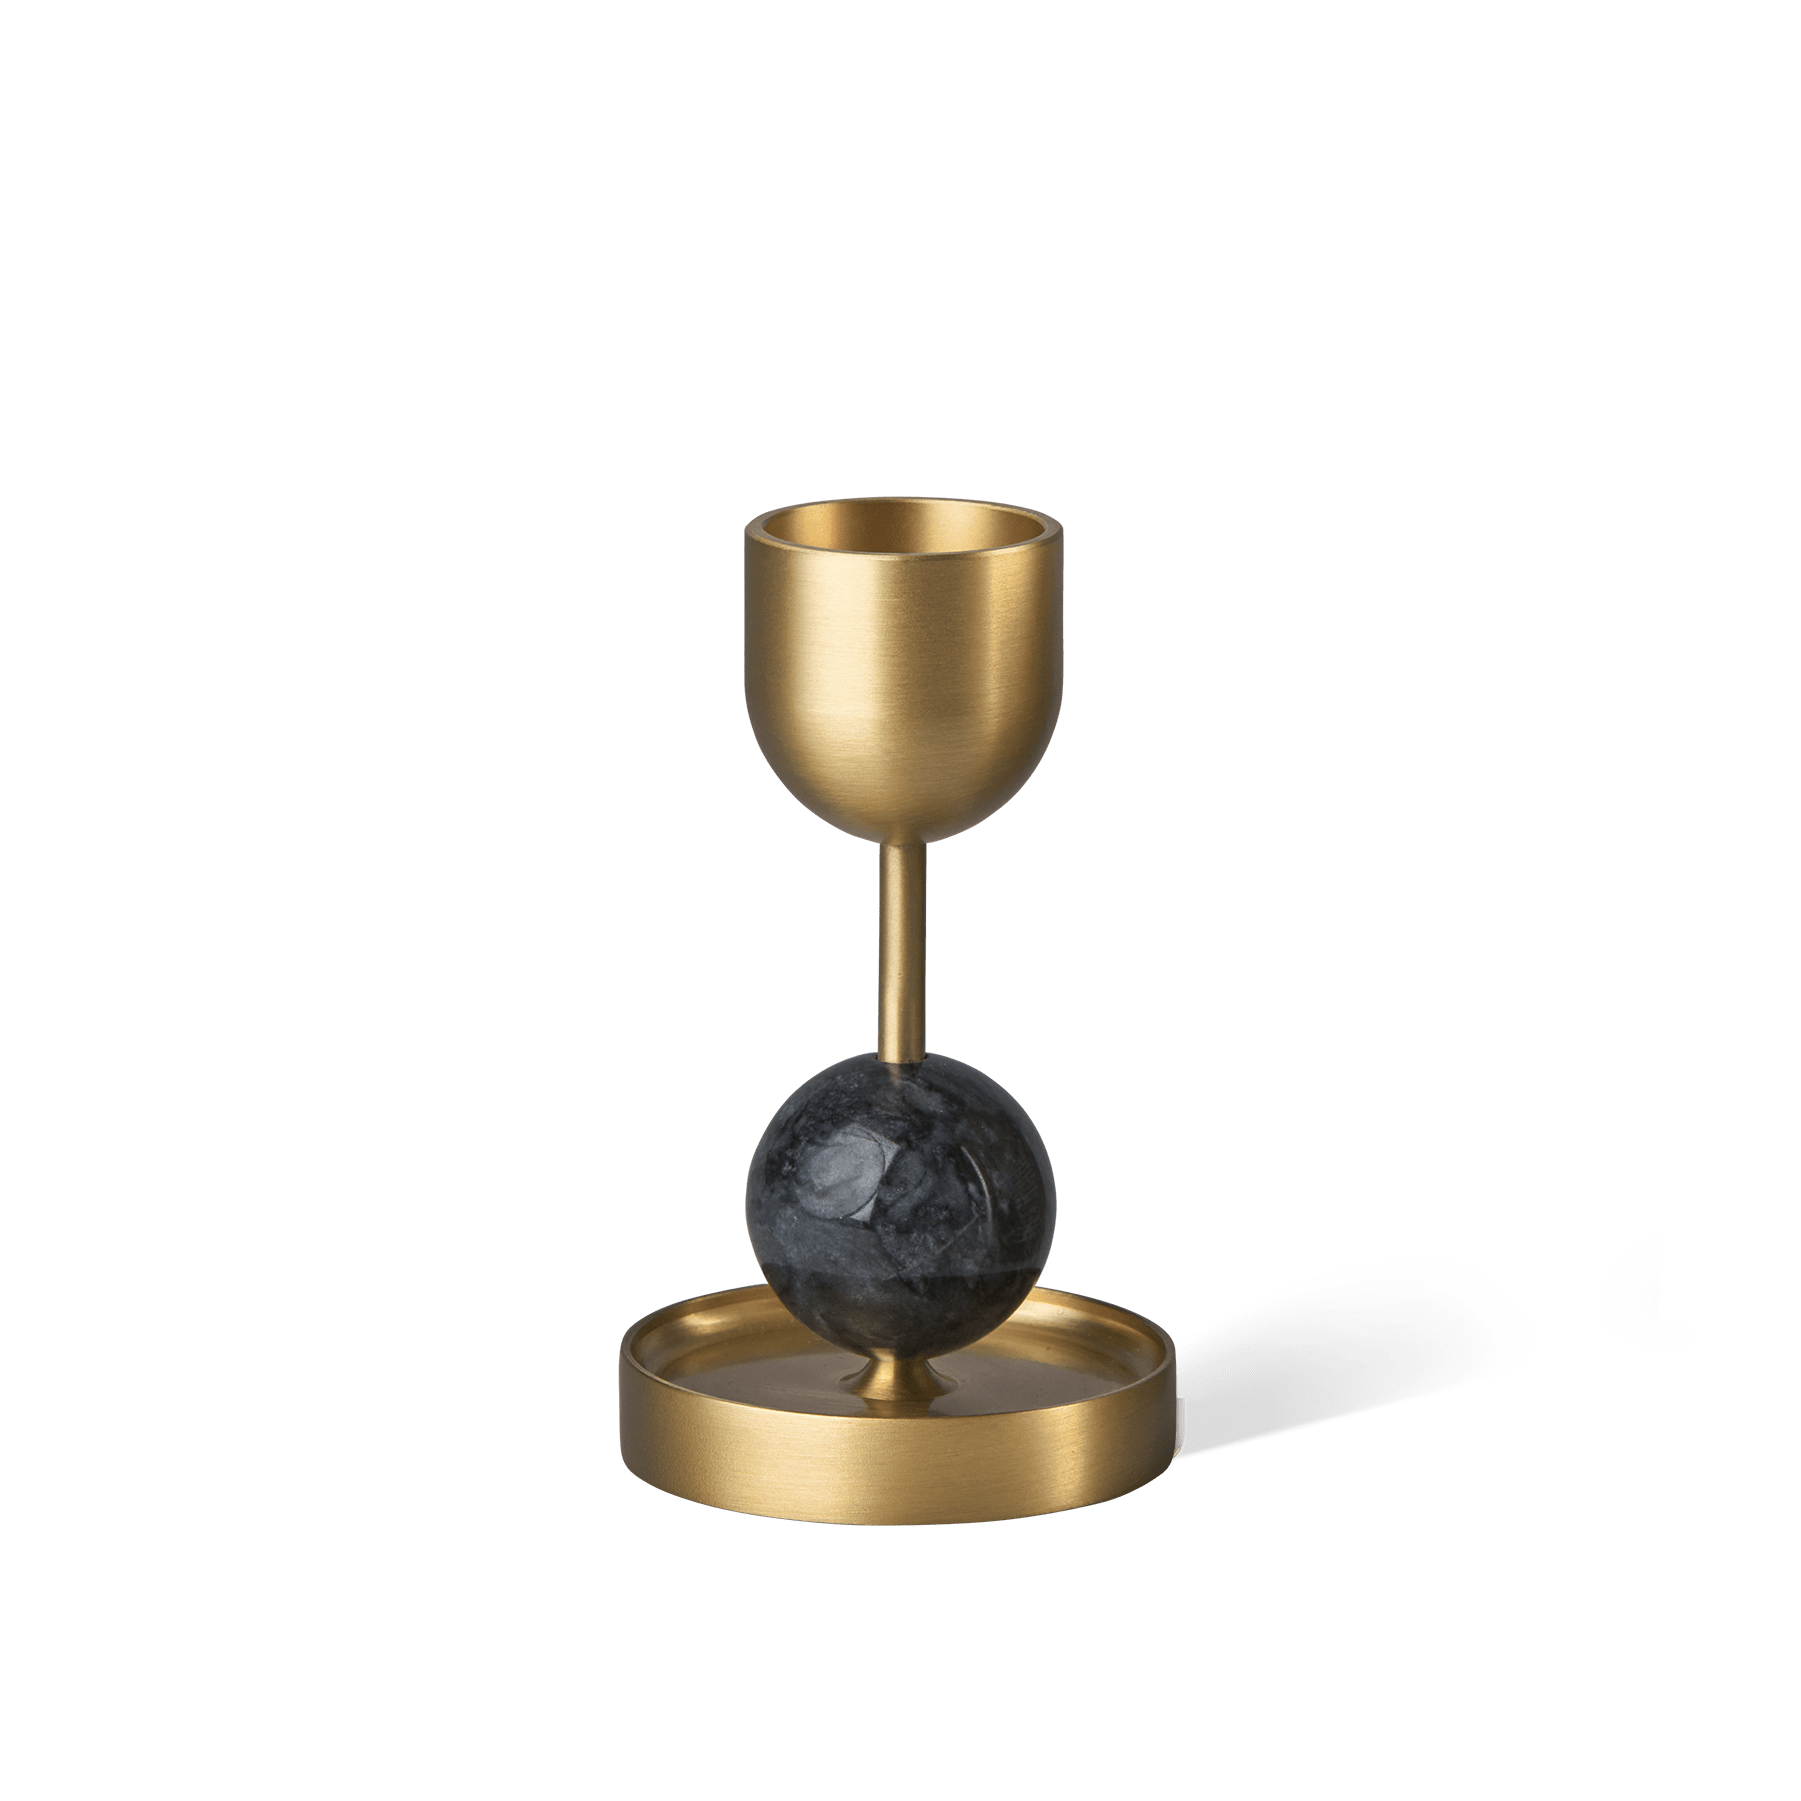 A perfect addition to our column candle collection. This brass candle holder can be used in two ways and easy to create a candle group setting. The plate design also c